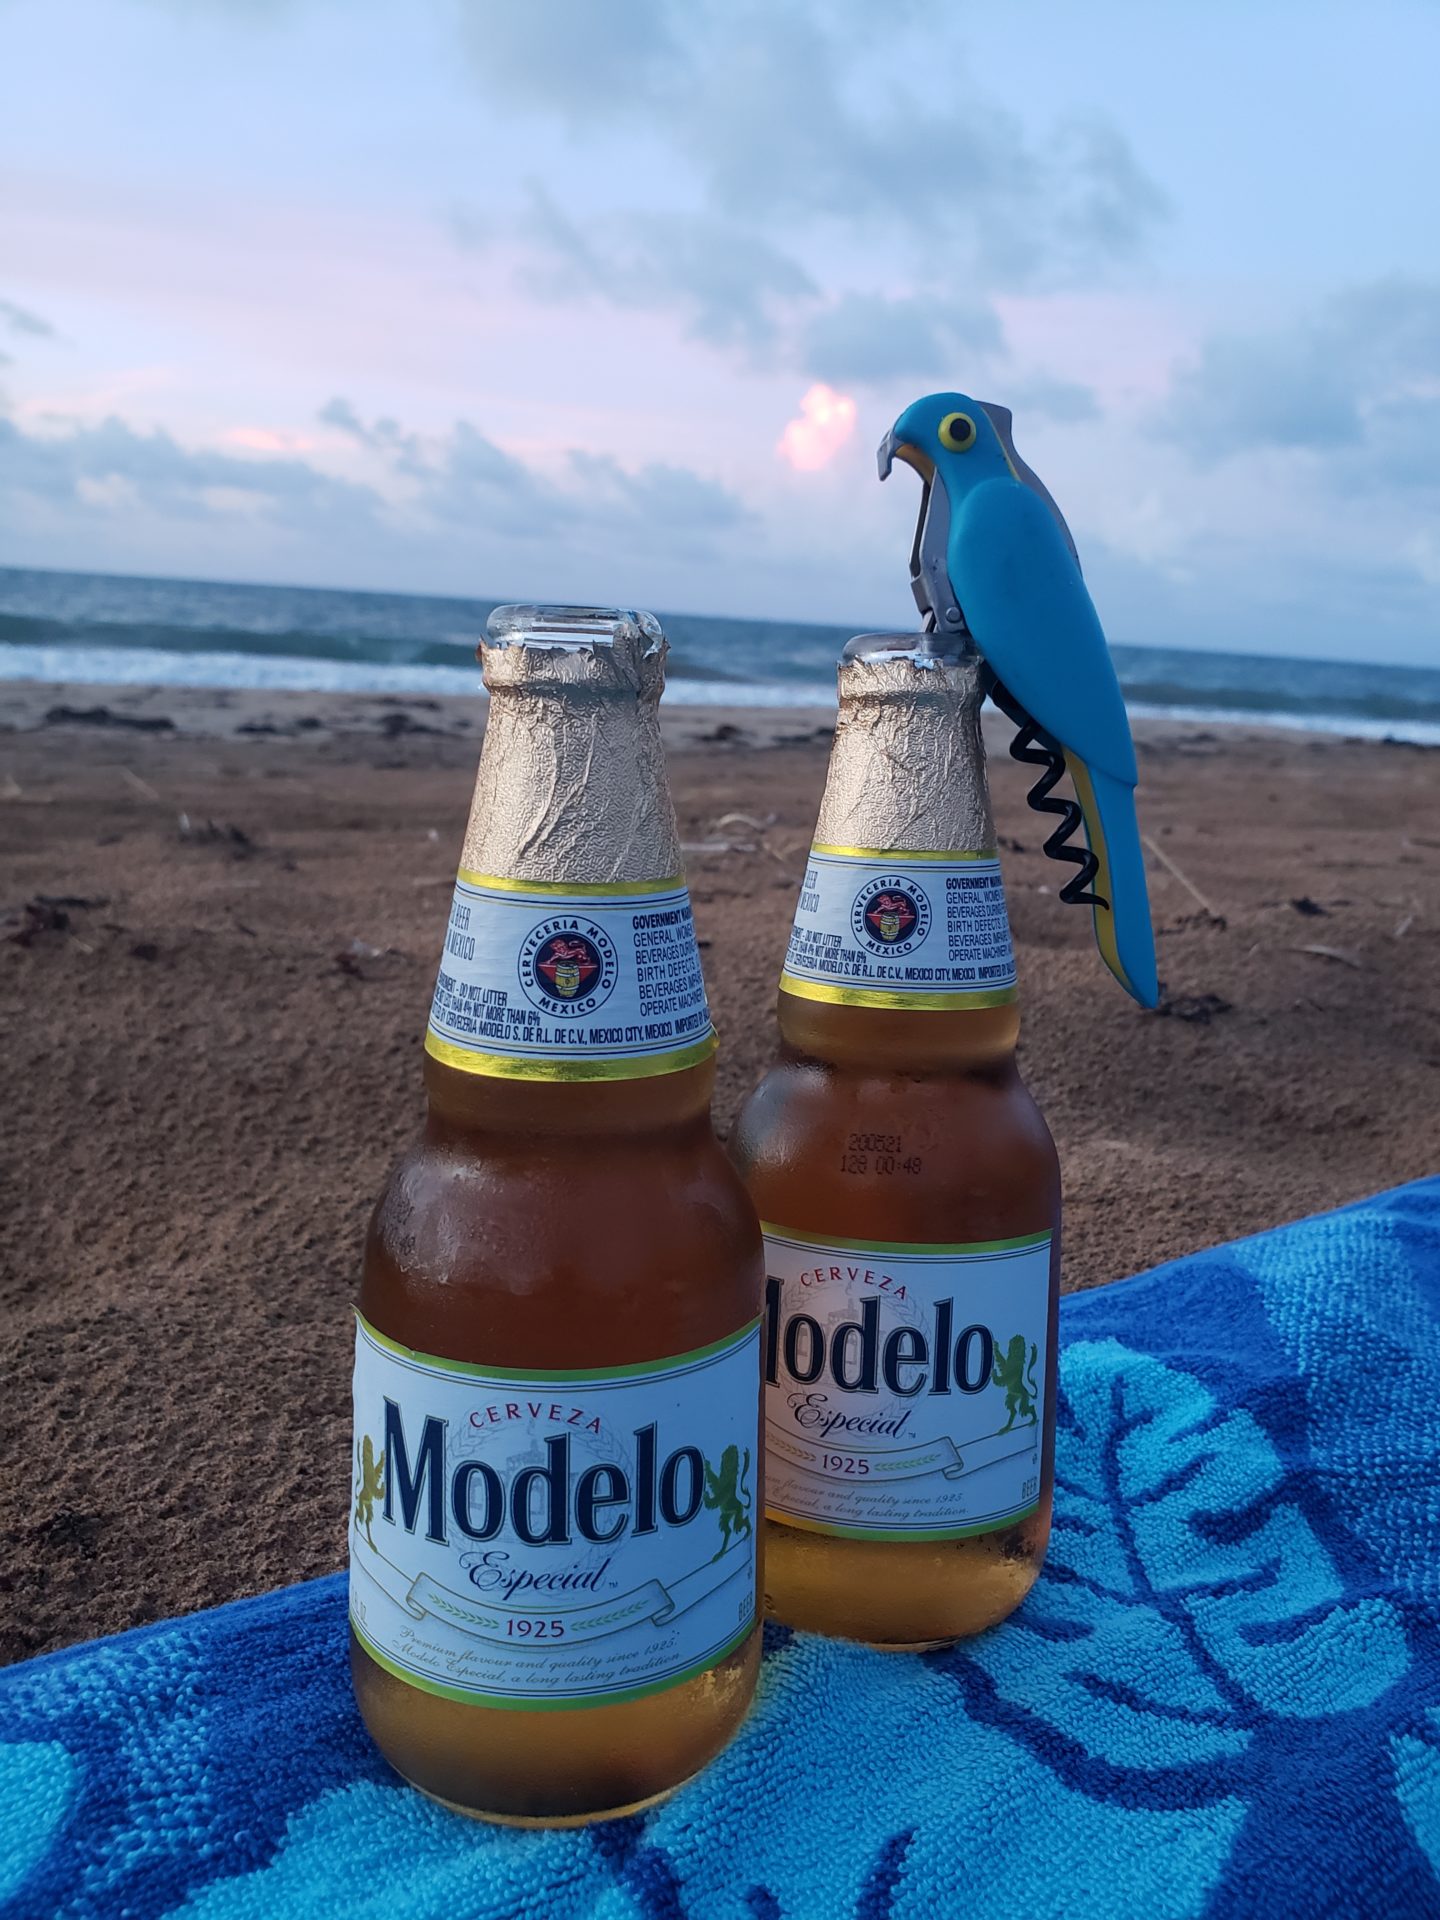 two bottles of beer on a towel on the beach